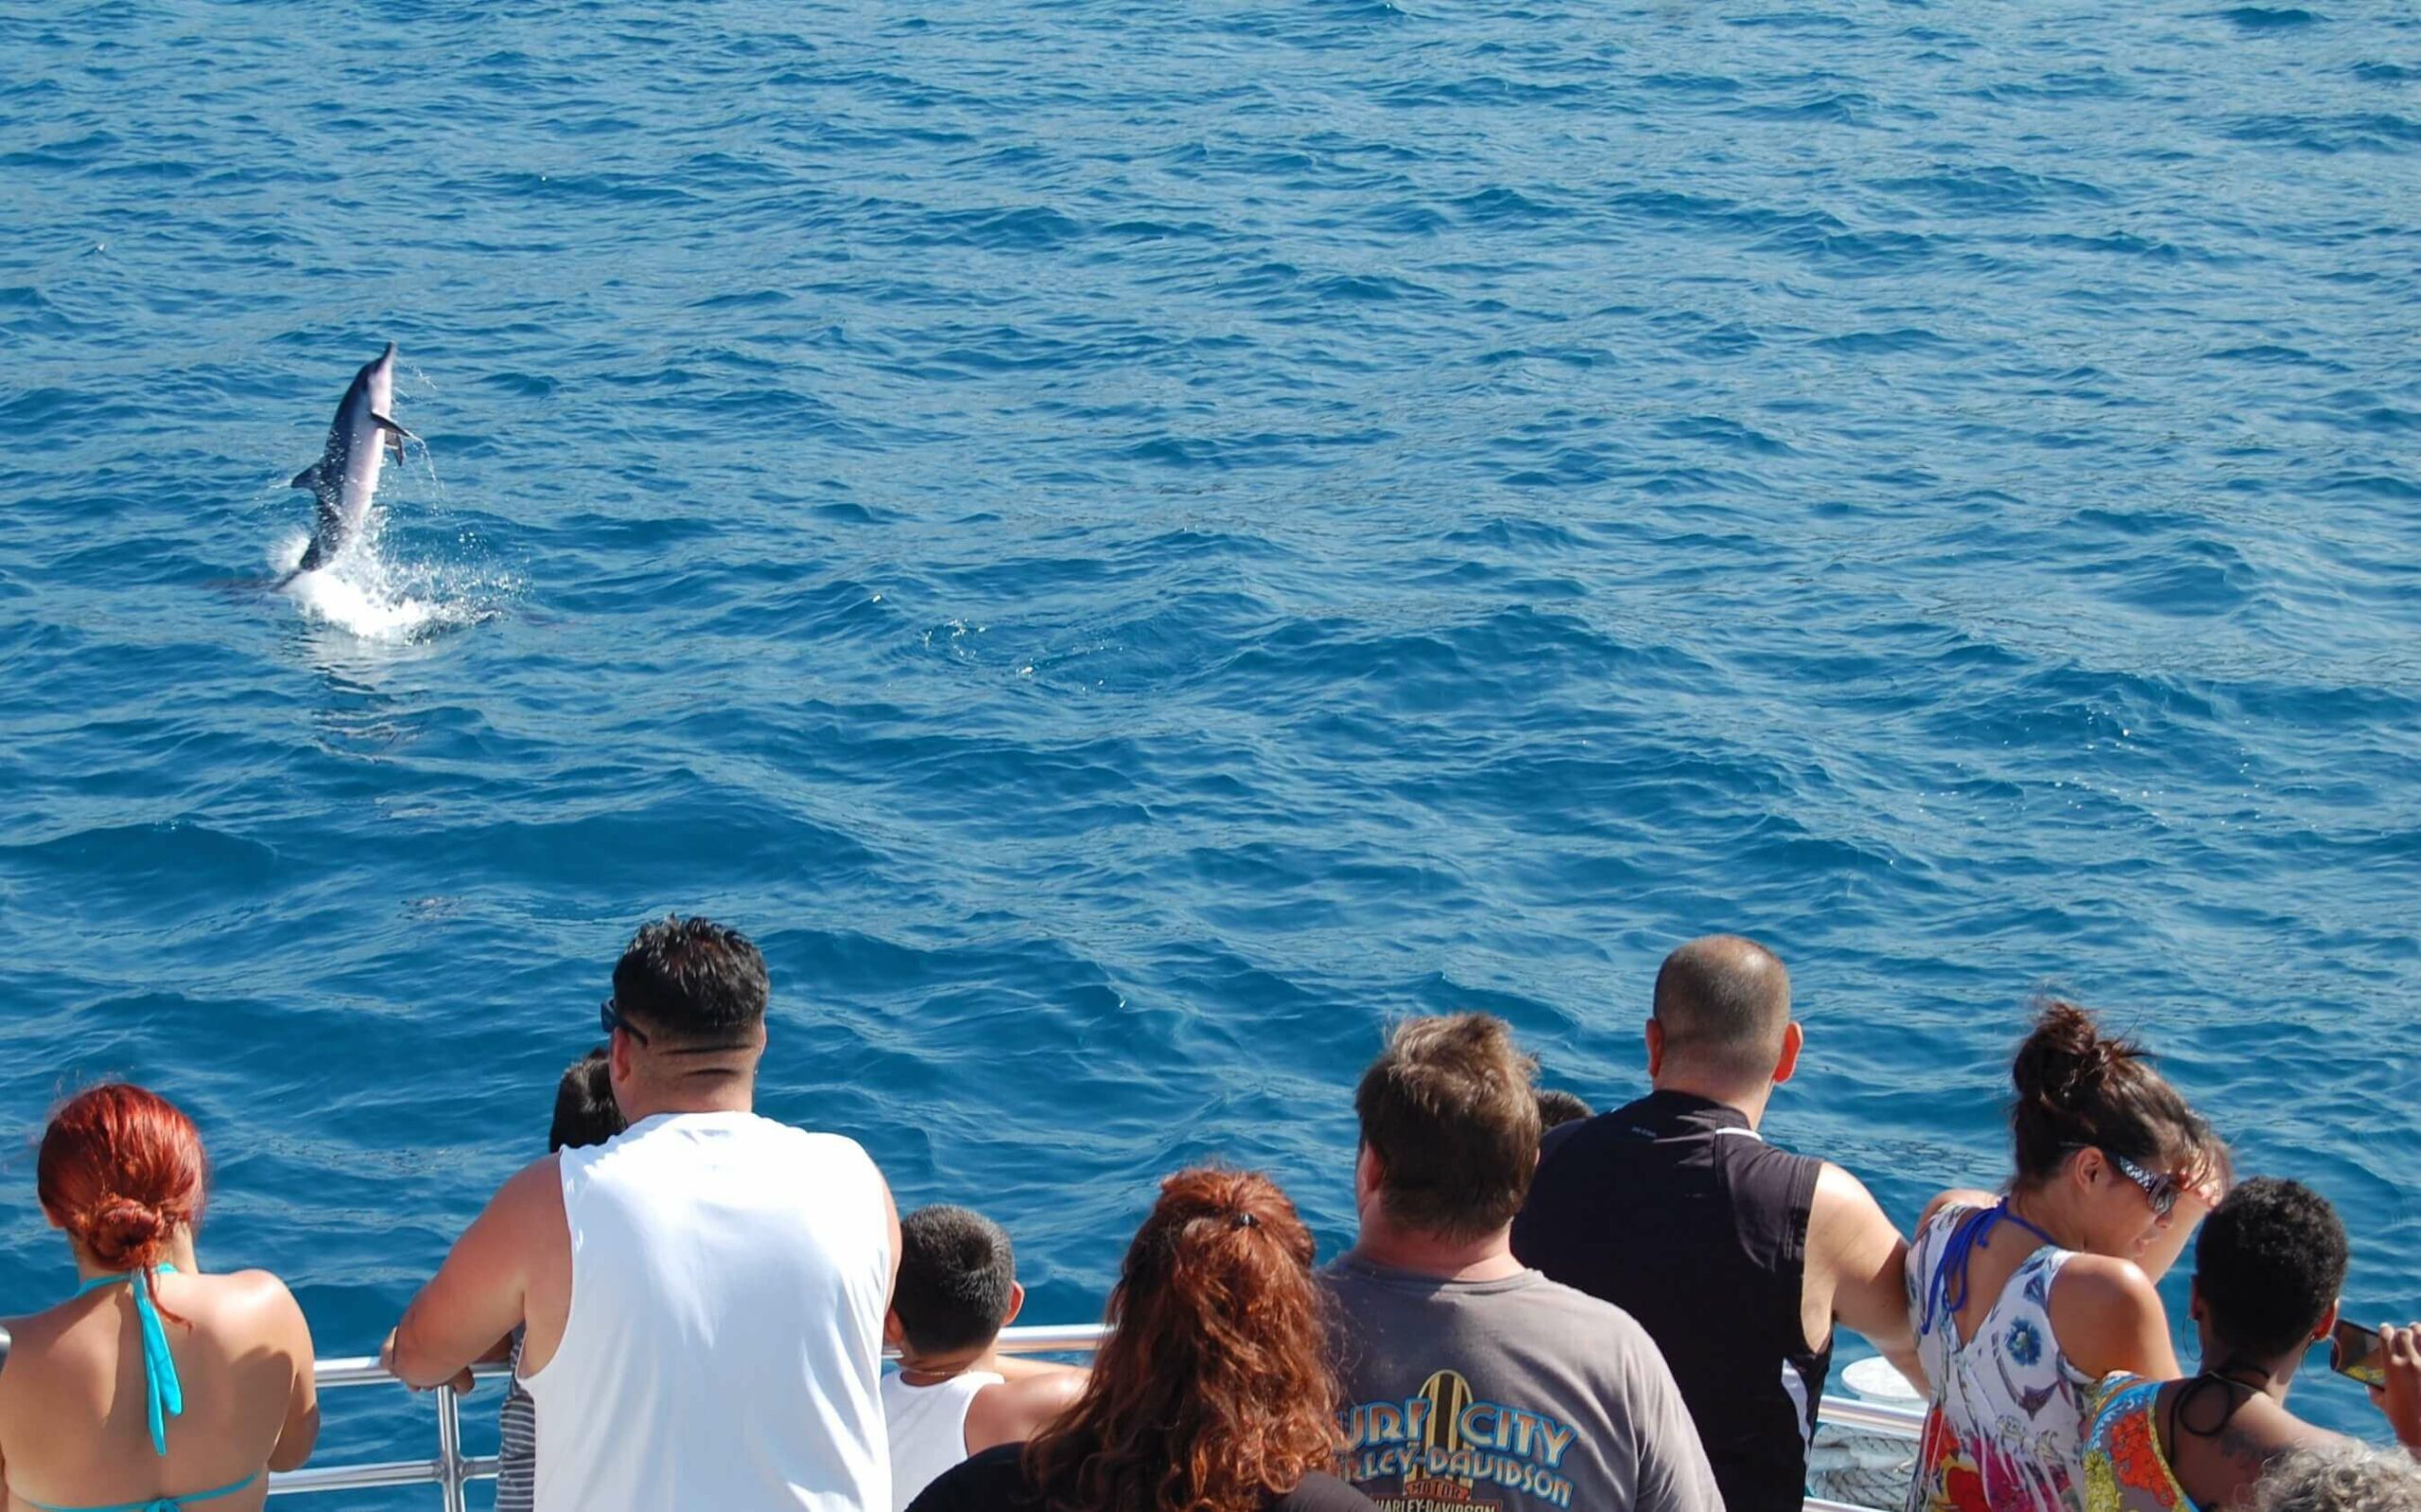 Guests watch dolphins jump in the waters off Kailua-Kona, Hawaii